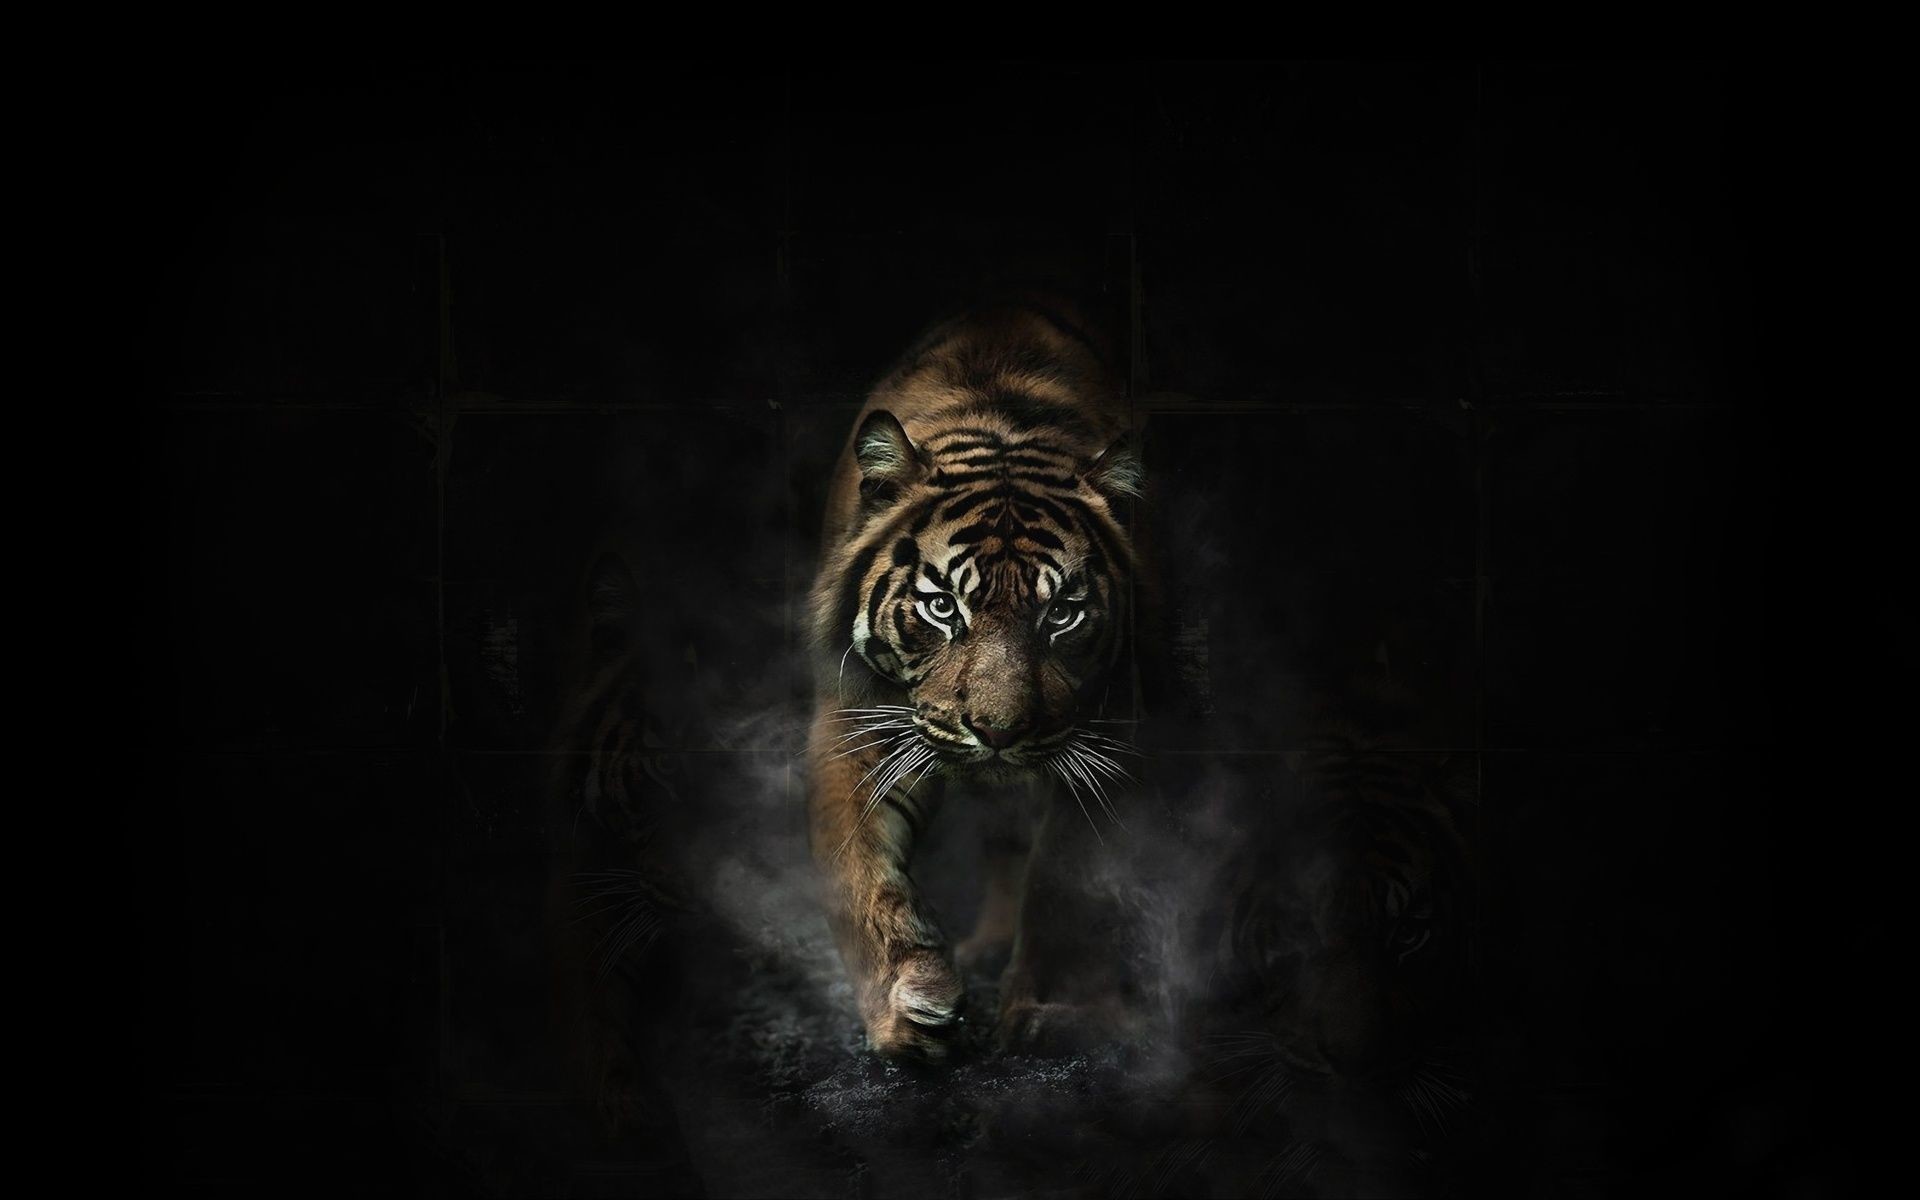 1920x1200 Tiger Wallpapers Collection For Free Download | HD Wallpapers | Pinterest | Tiger  wallpaper, Wallpaper and Hd wallpaper